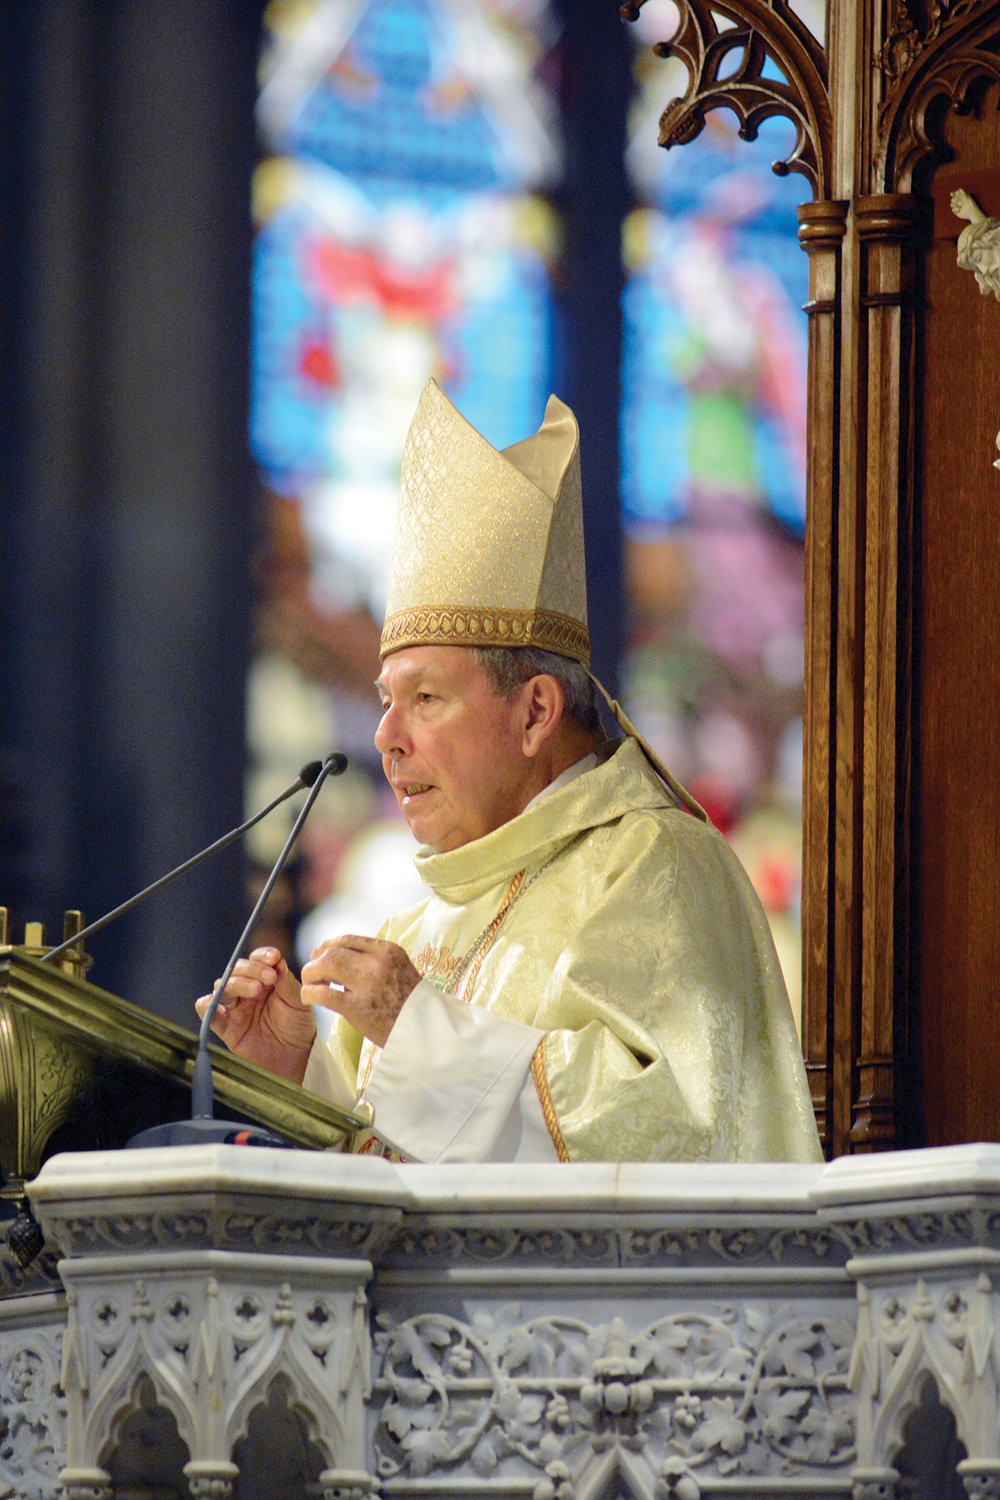 Archbishop José Octavio Ruiz Arenas delivers the homily during the annual St. Martin de Porres Mass at St. Patrick’s Cathedral, conducted in Spanish July 24. Archbishop Ruiz Arenas, who also served as principal celebrant, is secretary emeritus of the Dicastery for Evangelization, and also archbishop emeritus of Villavicencio, Colombia.